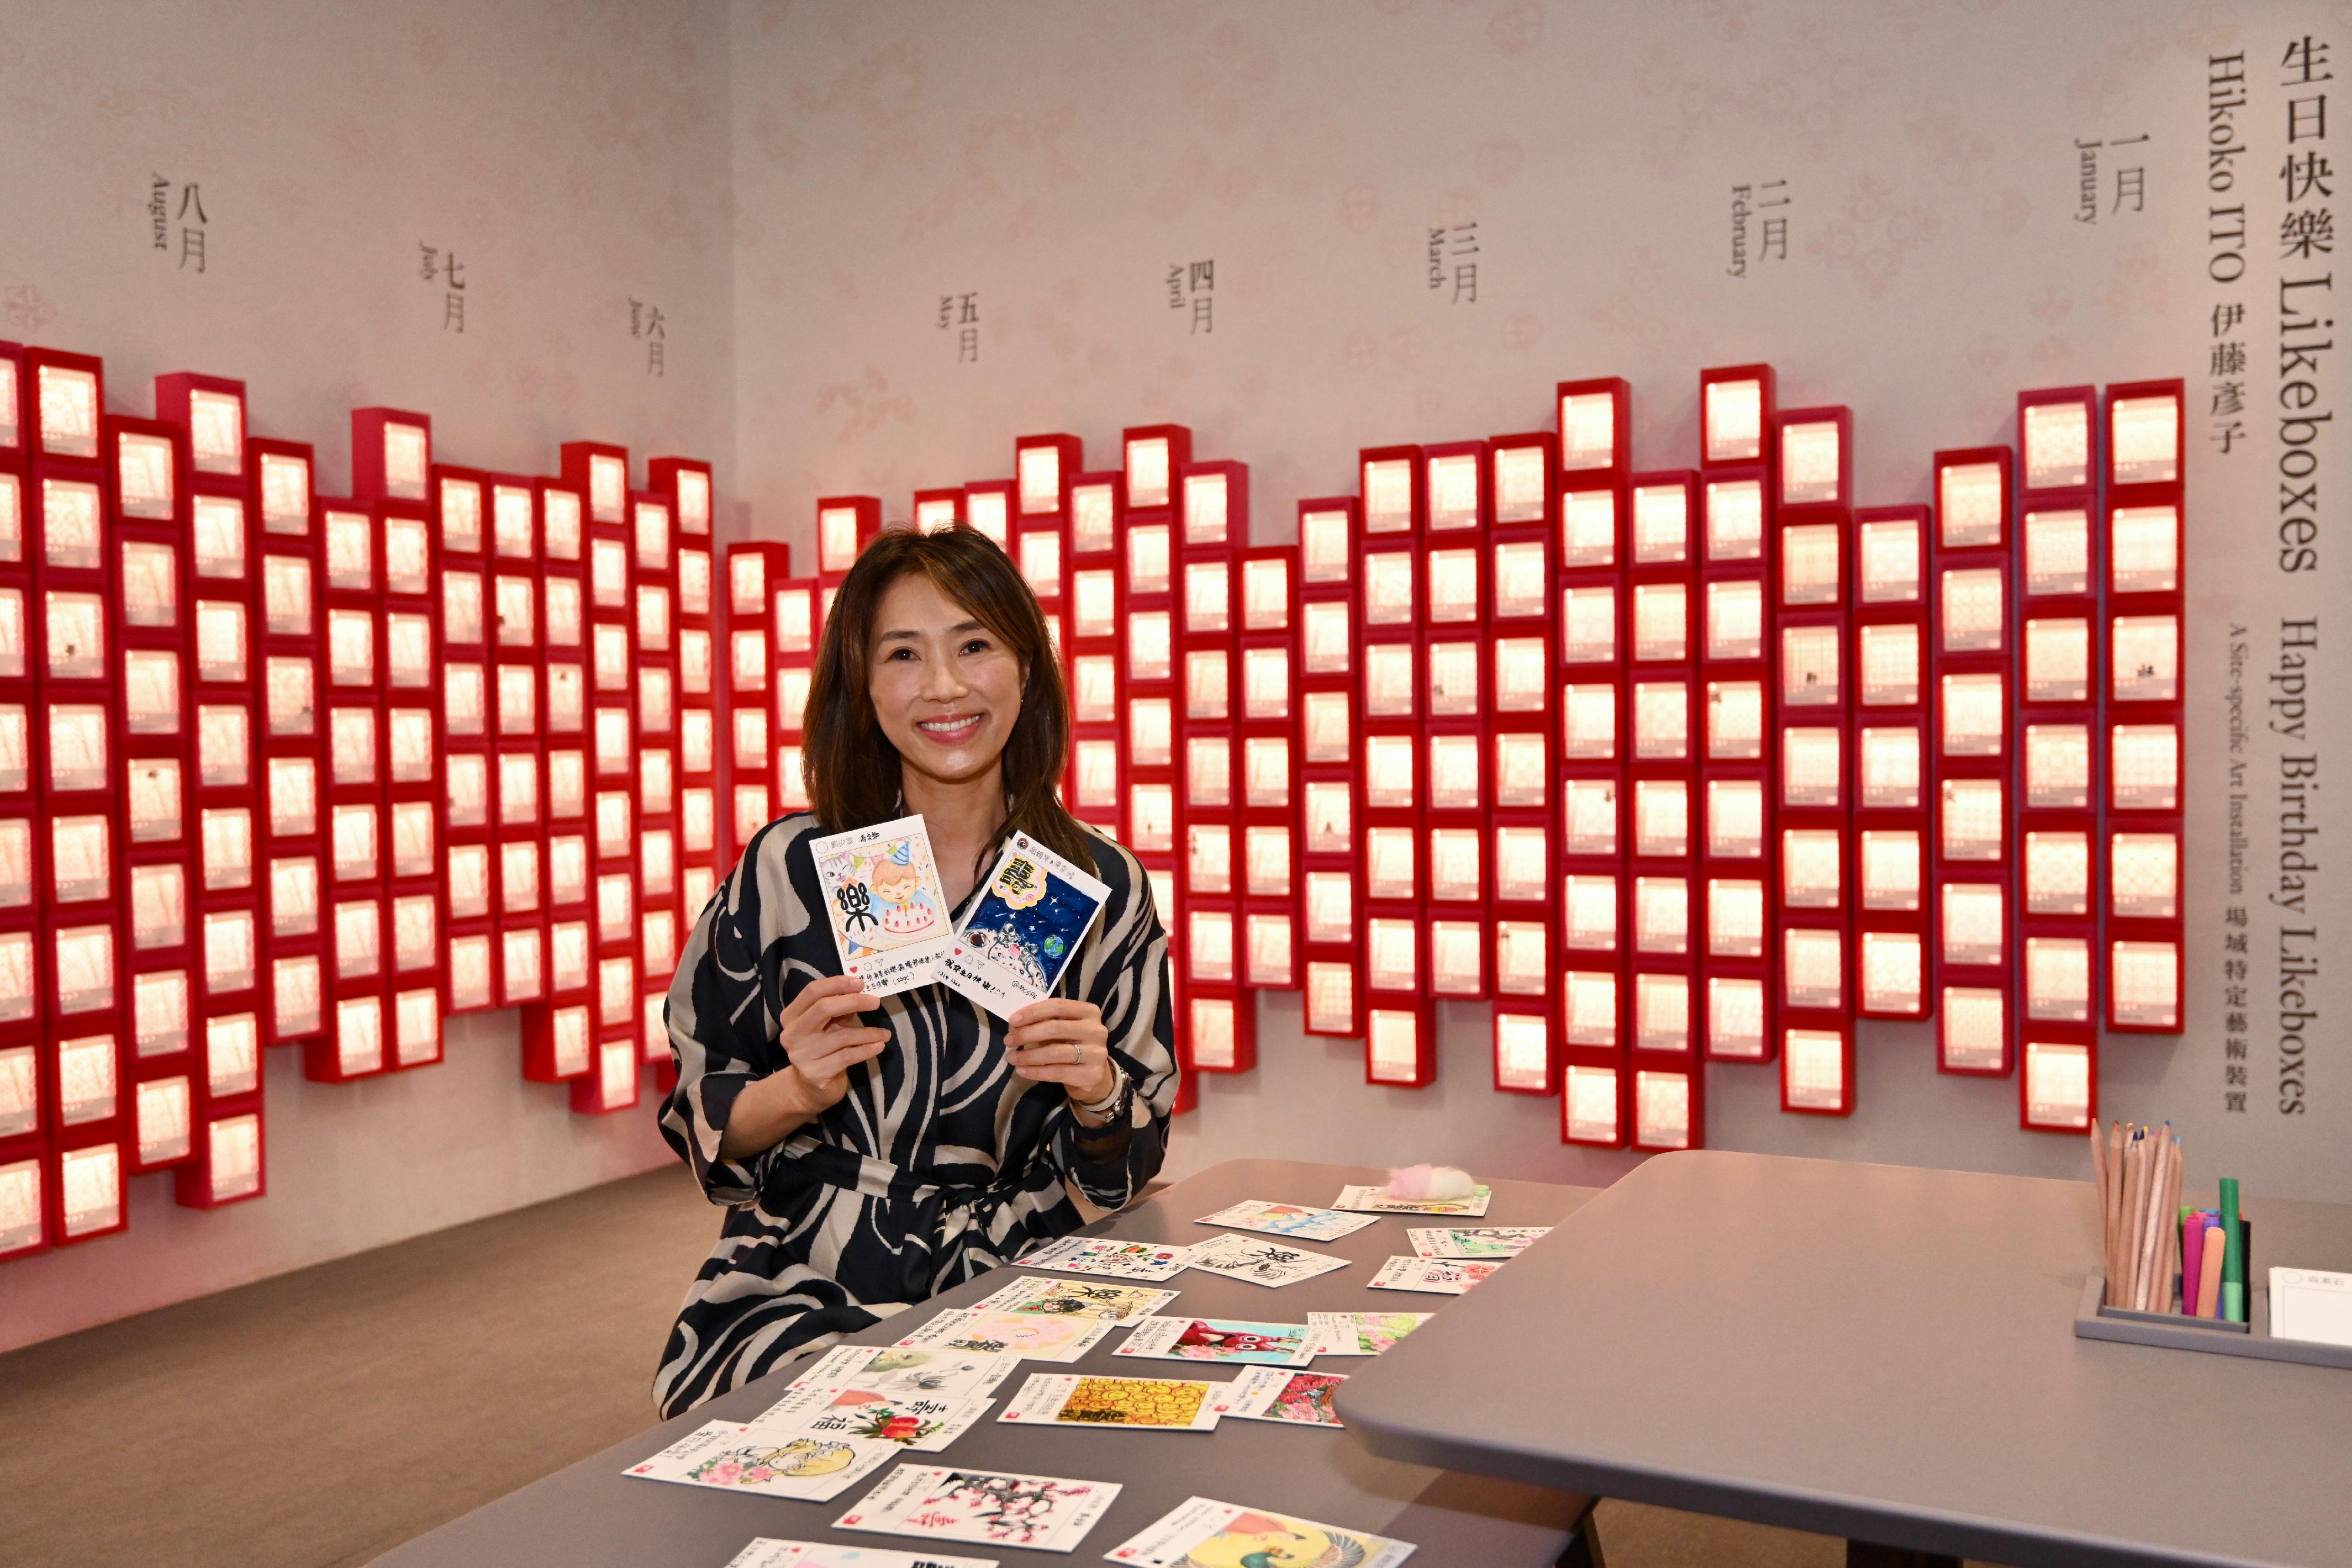 "Beyond Blessings: Birthday Greetings for the Master of Chih Lo Lou" exhibition will be held at the Hong Kong Museum of Art from tomorrow (July 14). Picture shows Hong Kong artist Hikoko Ito and her art installation titled "Happy Birthday Likeboxes" customised for the exhibition. 